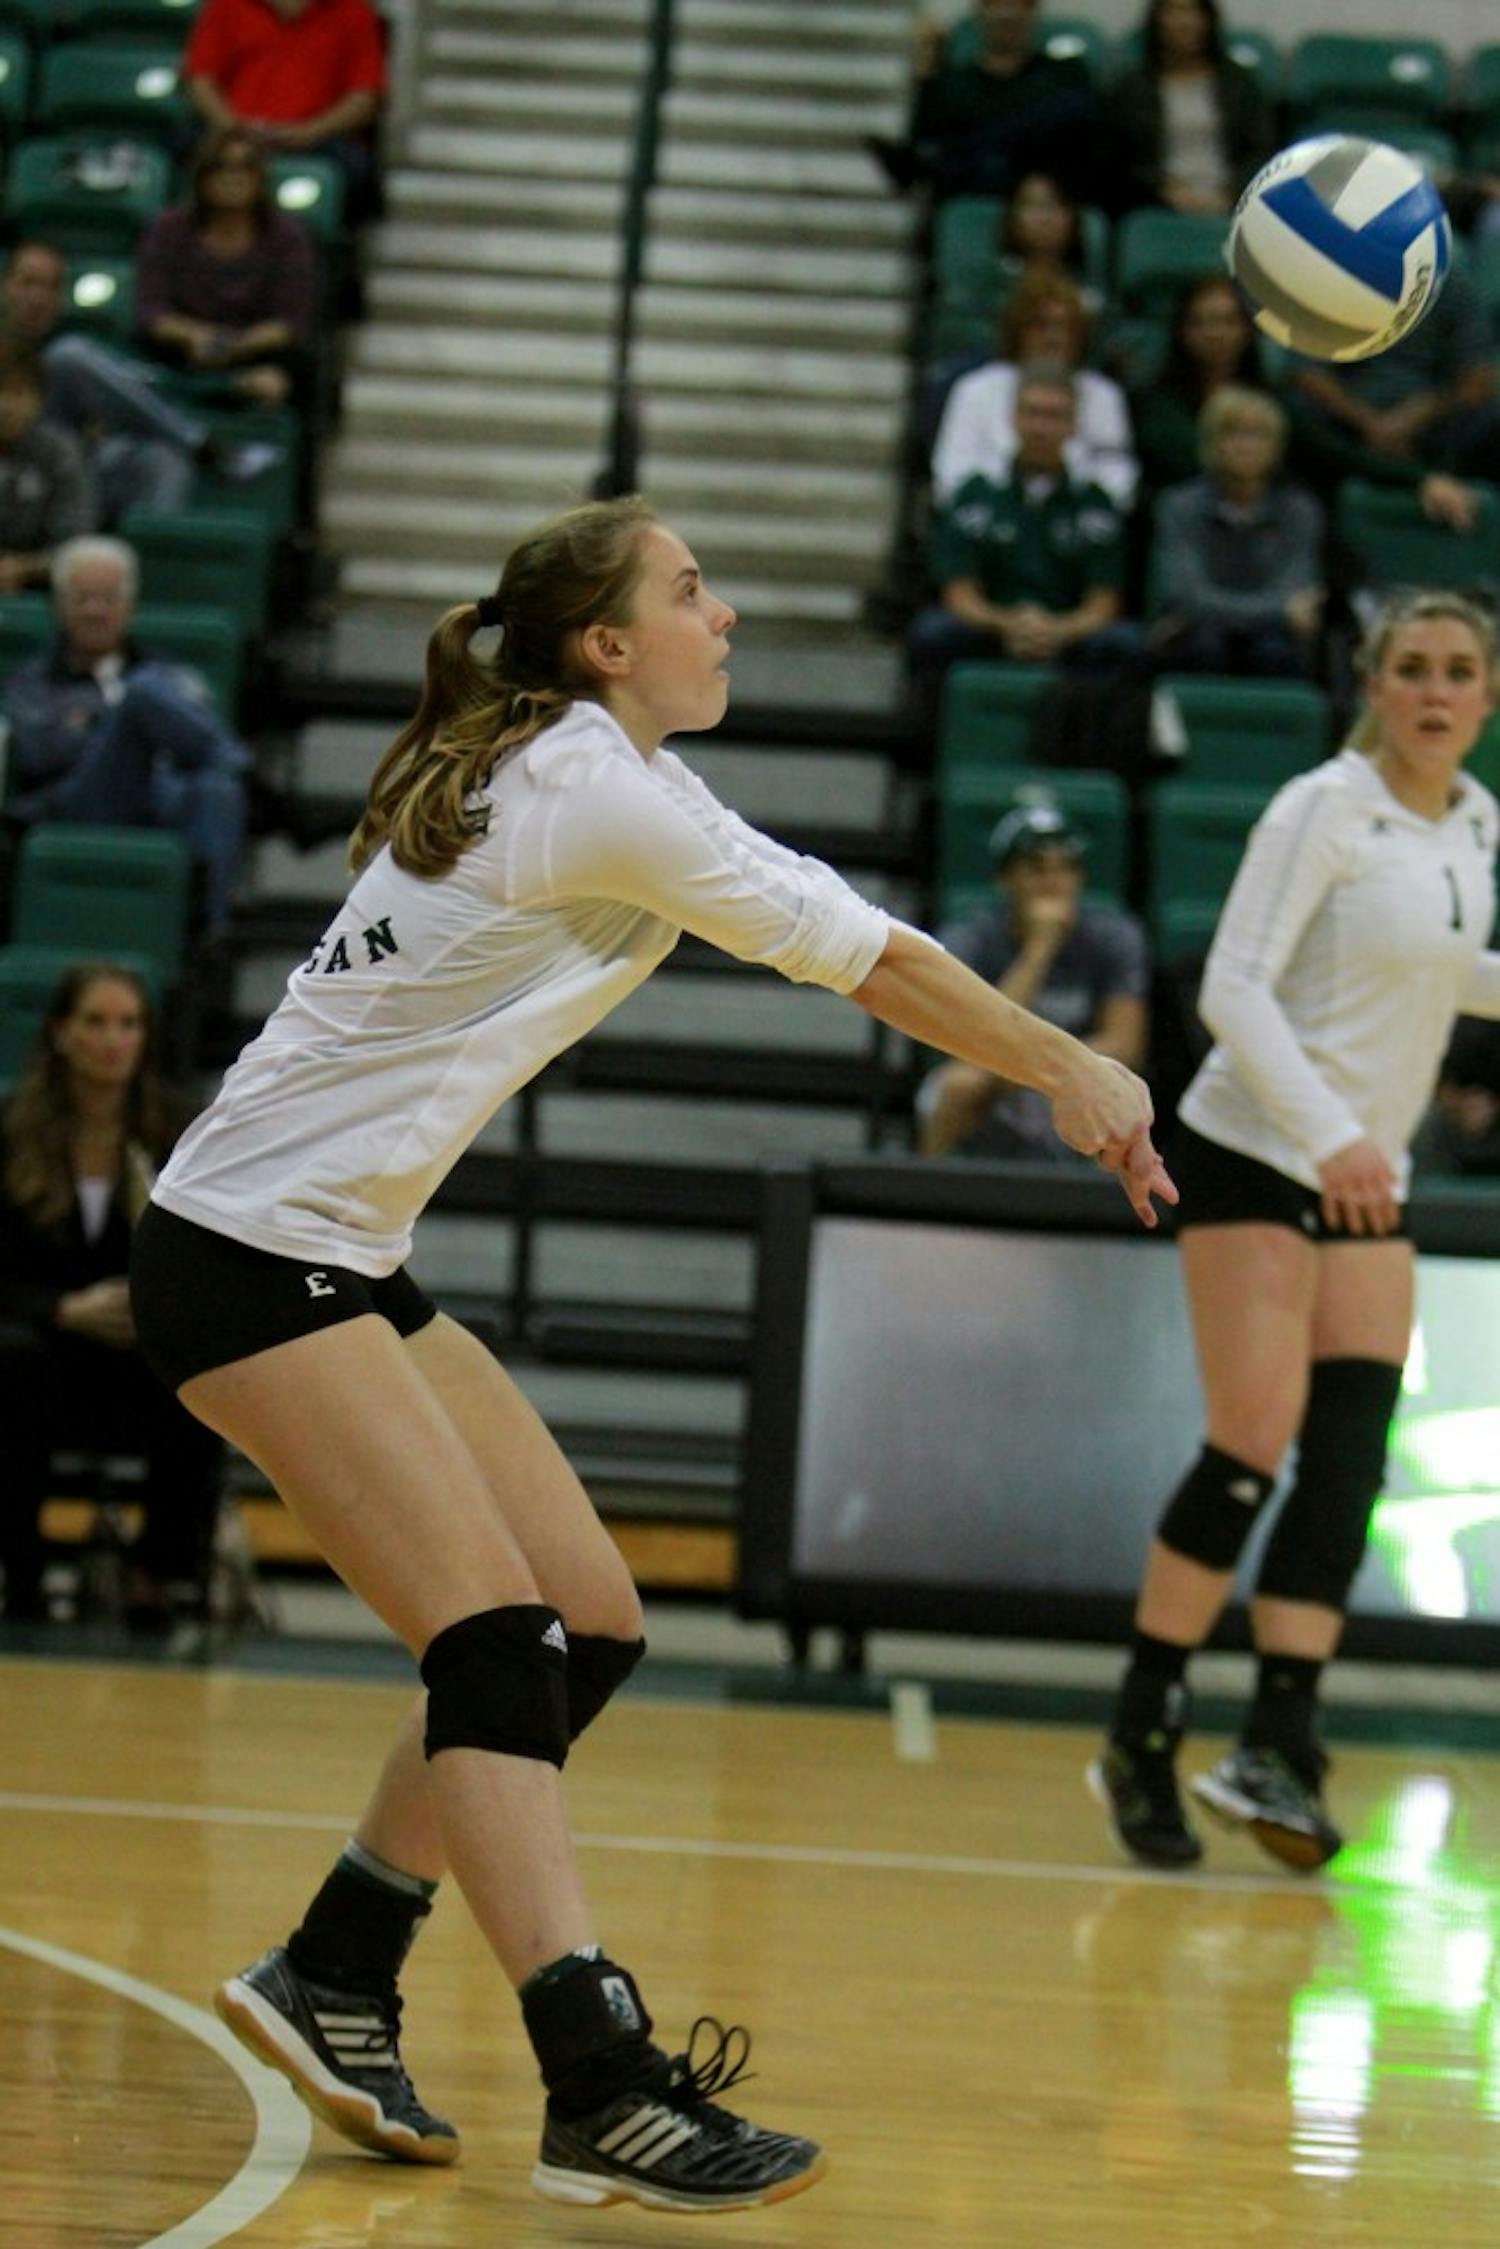 Rachel Irbe bumps the ball during the volleyball game against Western Michigan at the Convocation Center in Ypsilanti on Friday, September 30, 2016.